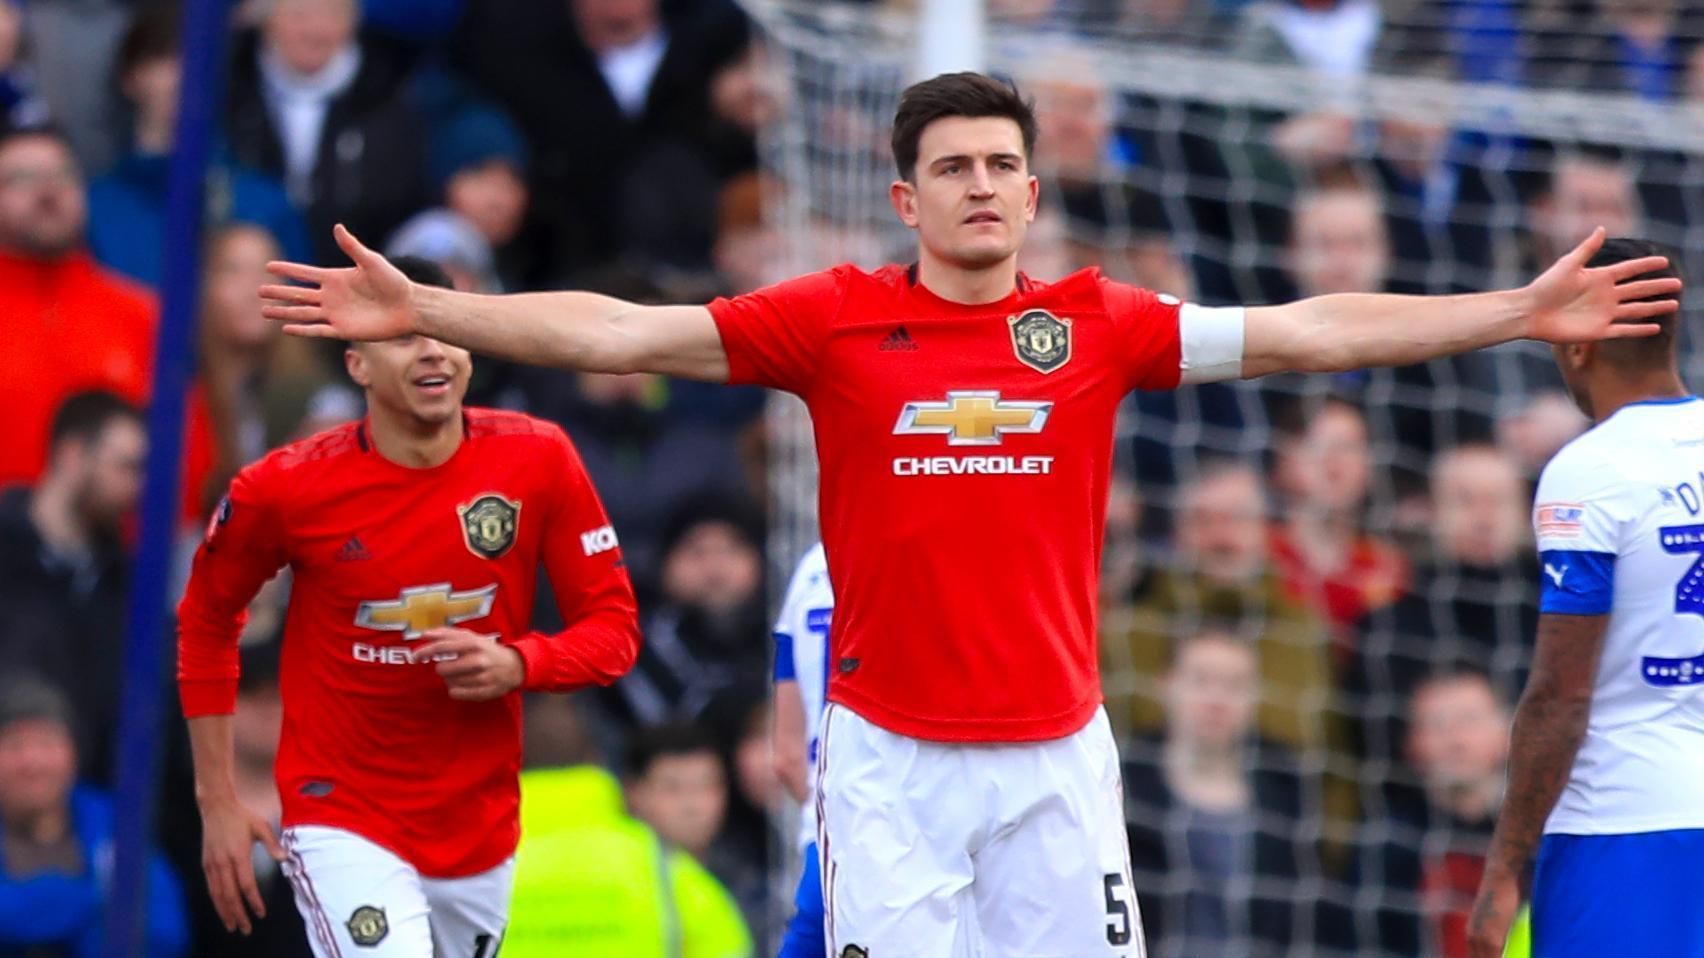 Harry Maguire's first Manchester United goal is a beauty | Watch ESPN